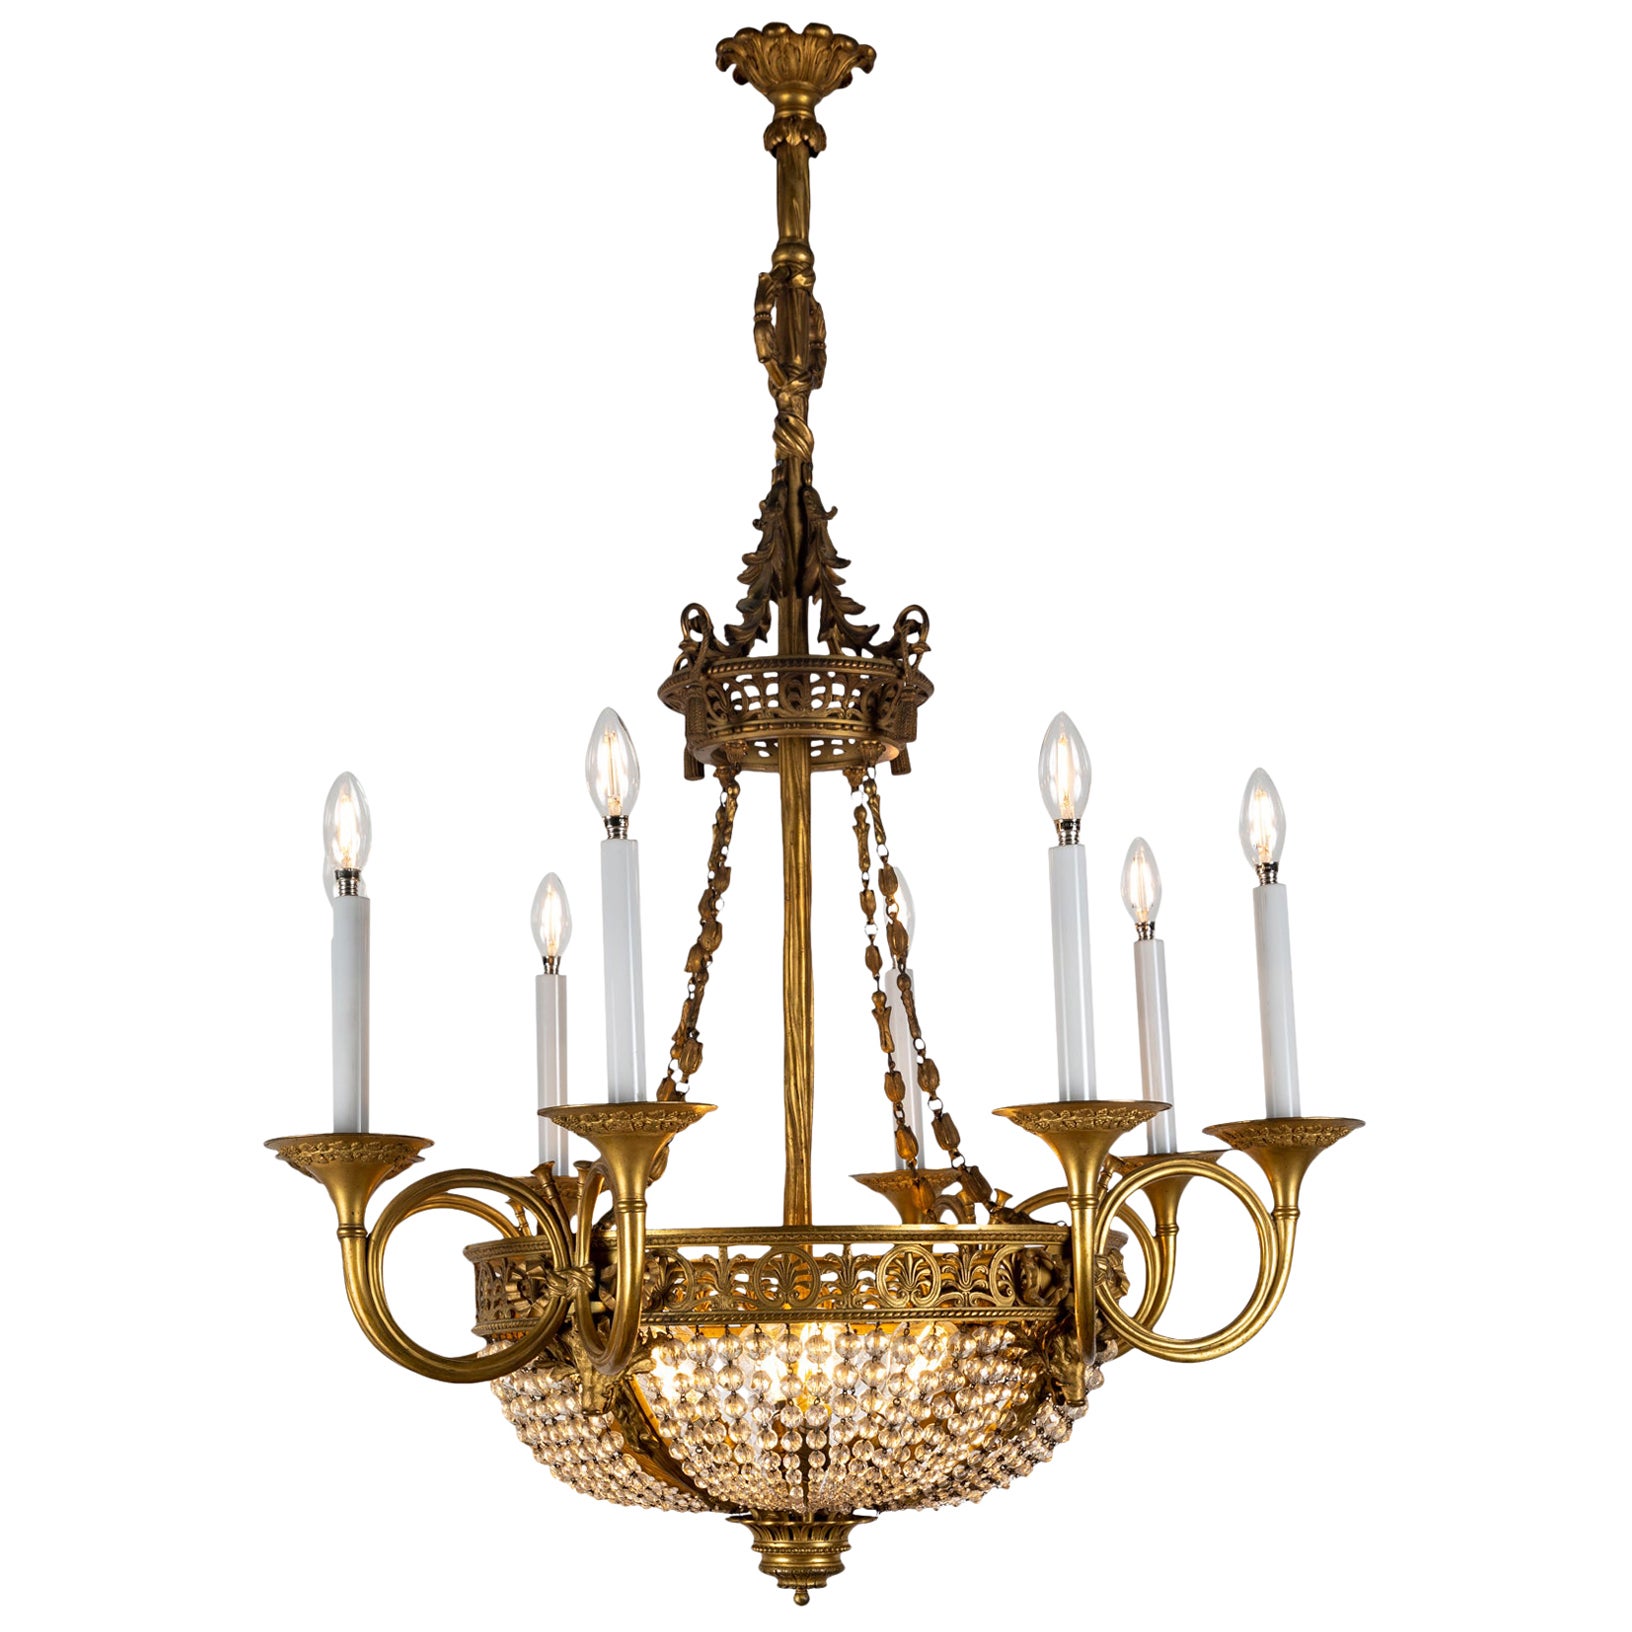 Large French Directoire Period Bronze and Crystal Twelve Light Chandelier